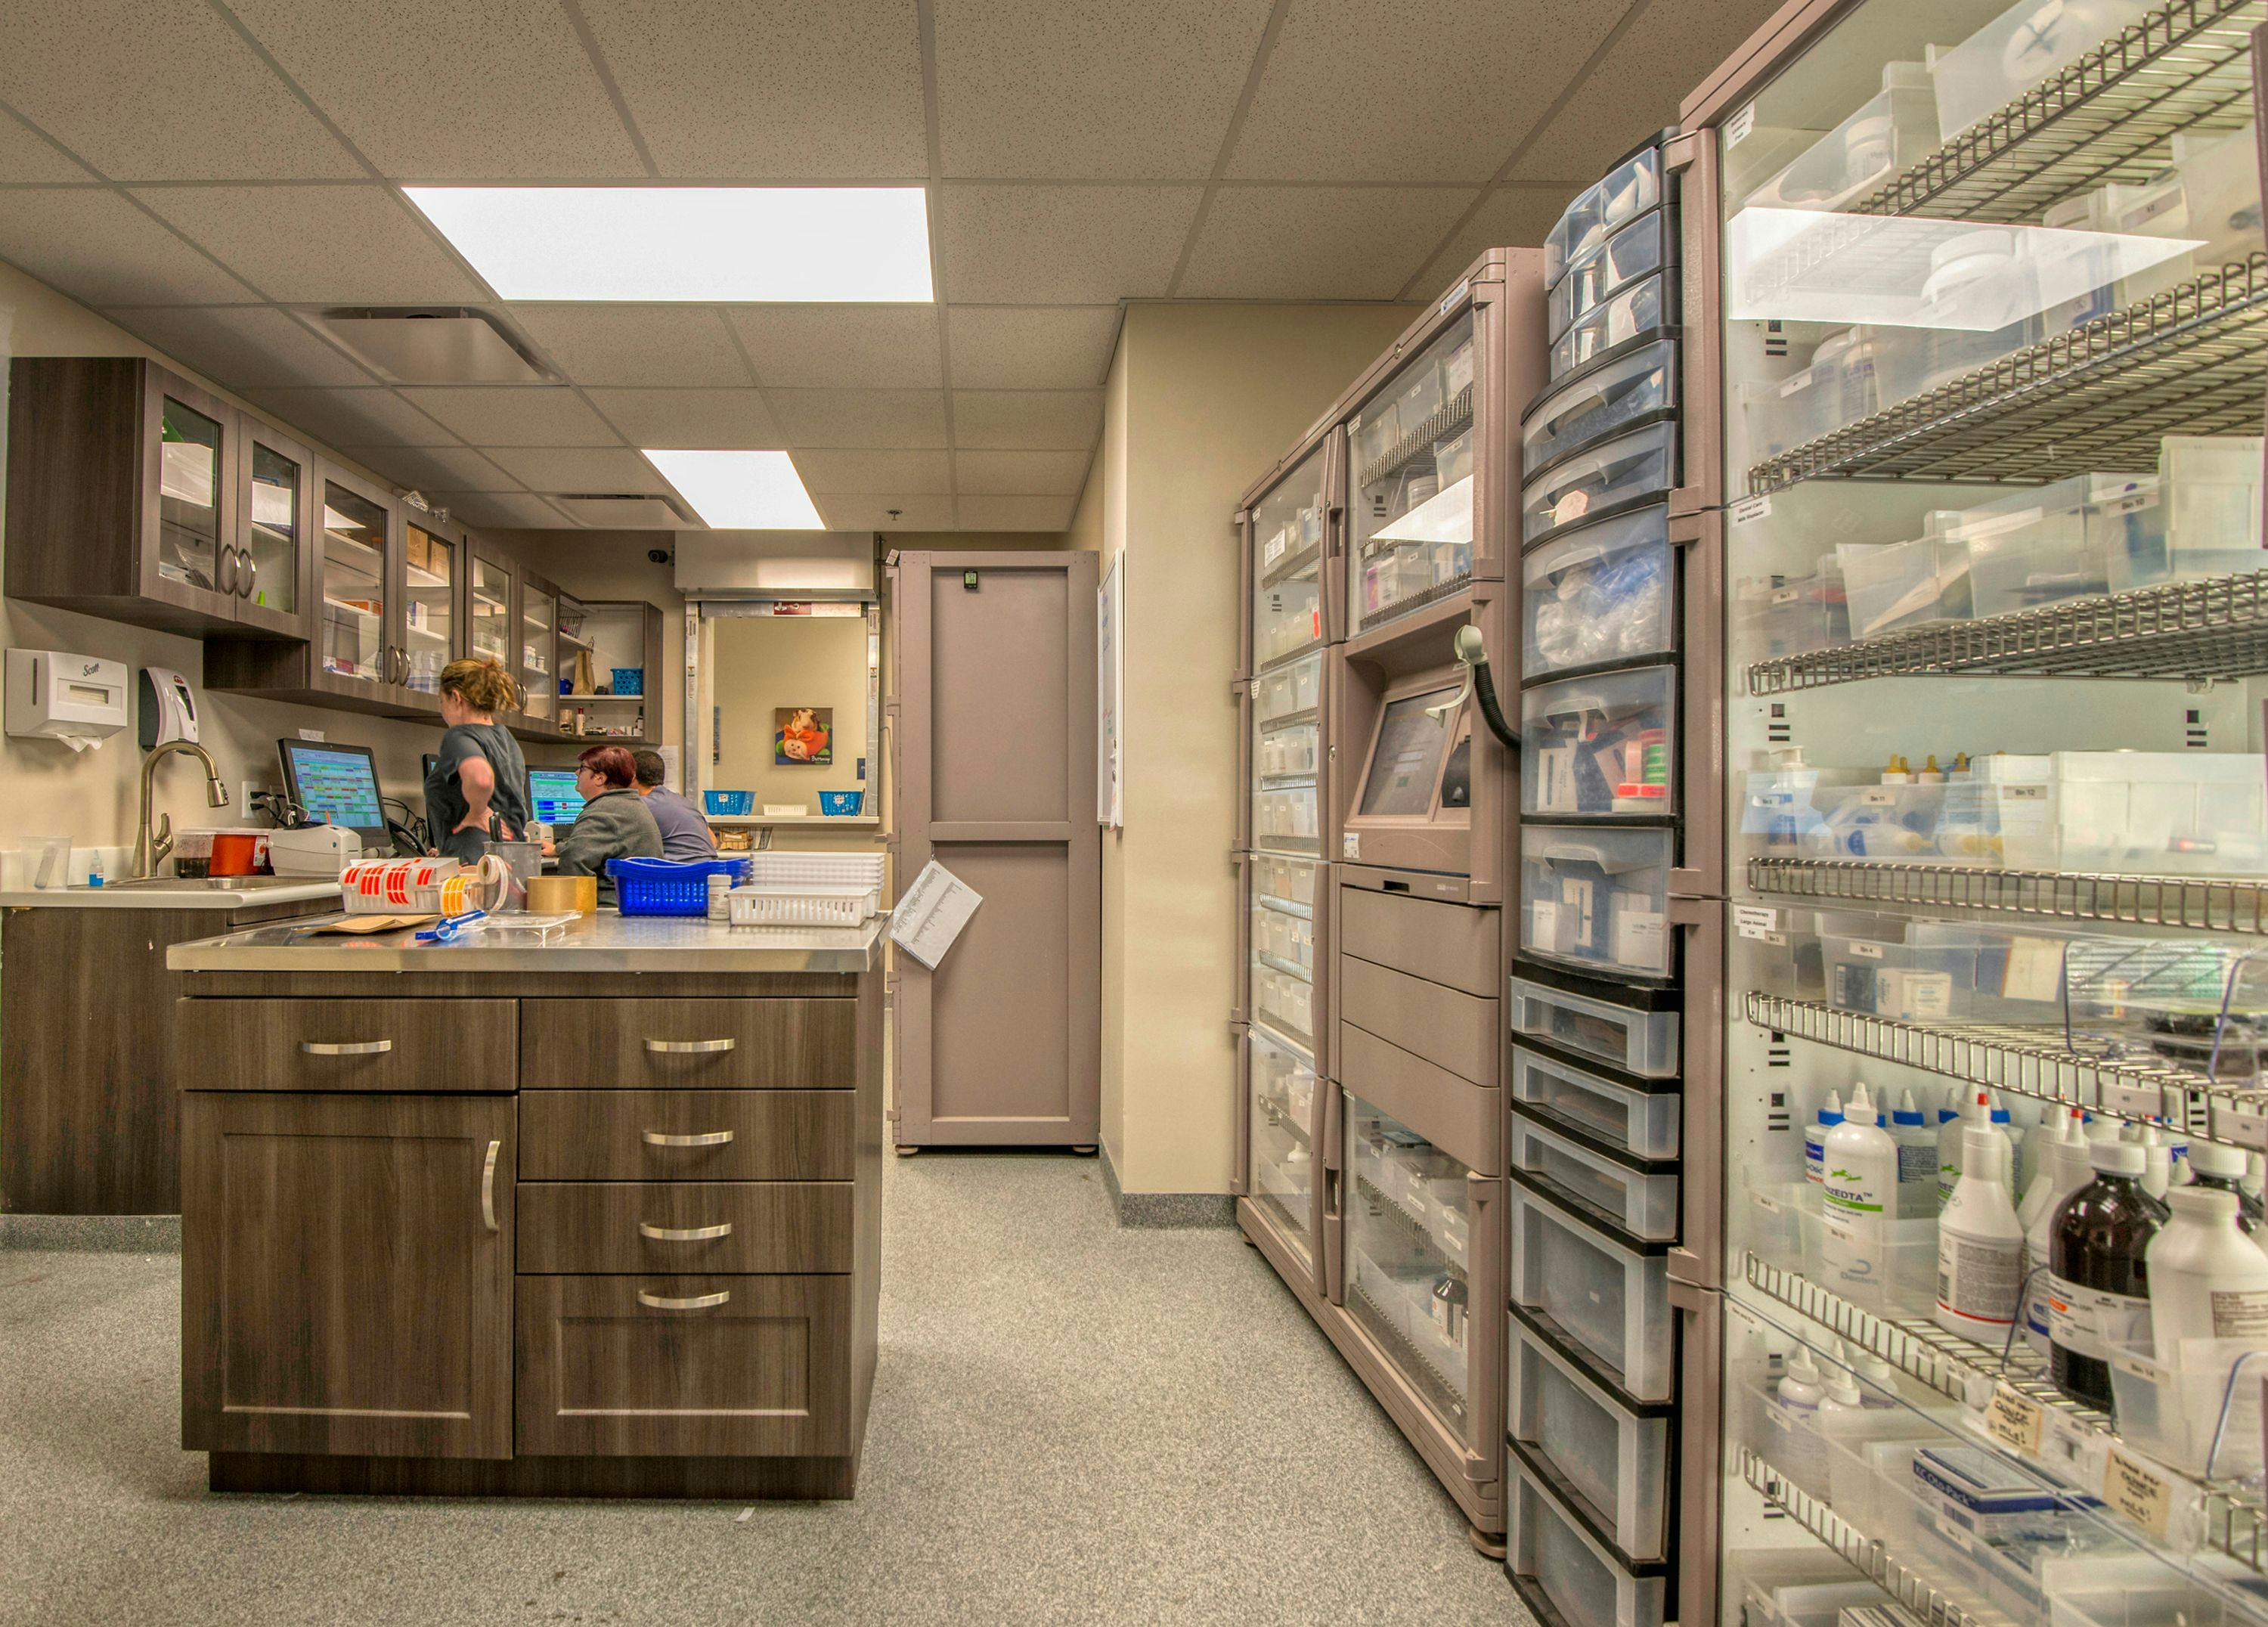 The in-house laboratory and pharmacy are conveniently located between the primary care practice (original wing of the hospital) and the new specialty/emergency wing, allowing for a seamless transition between old and new.